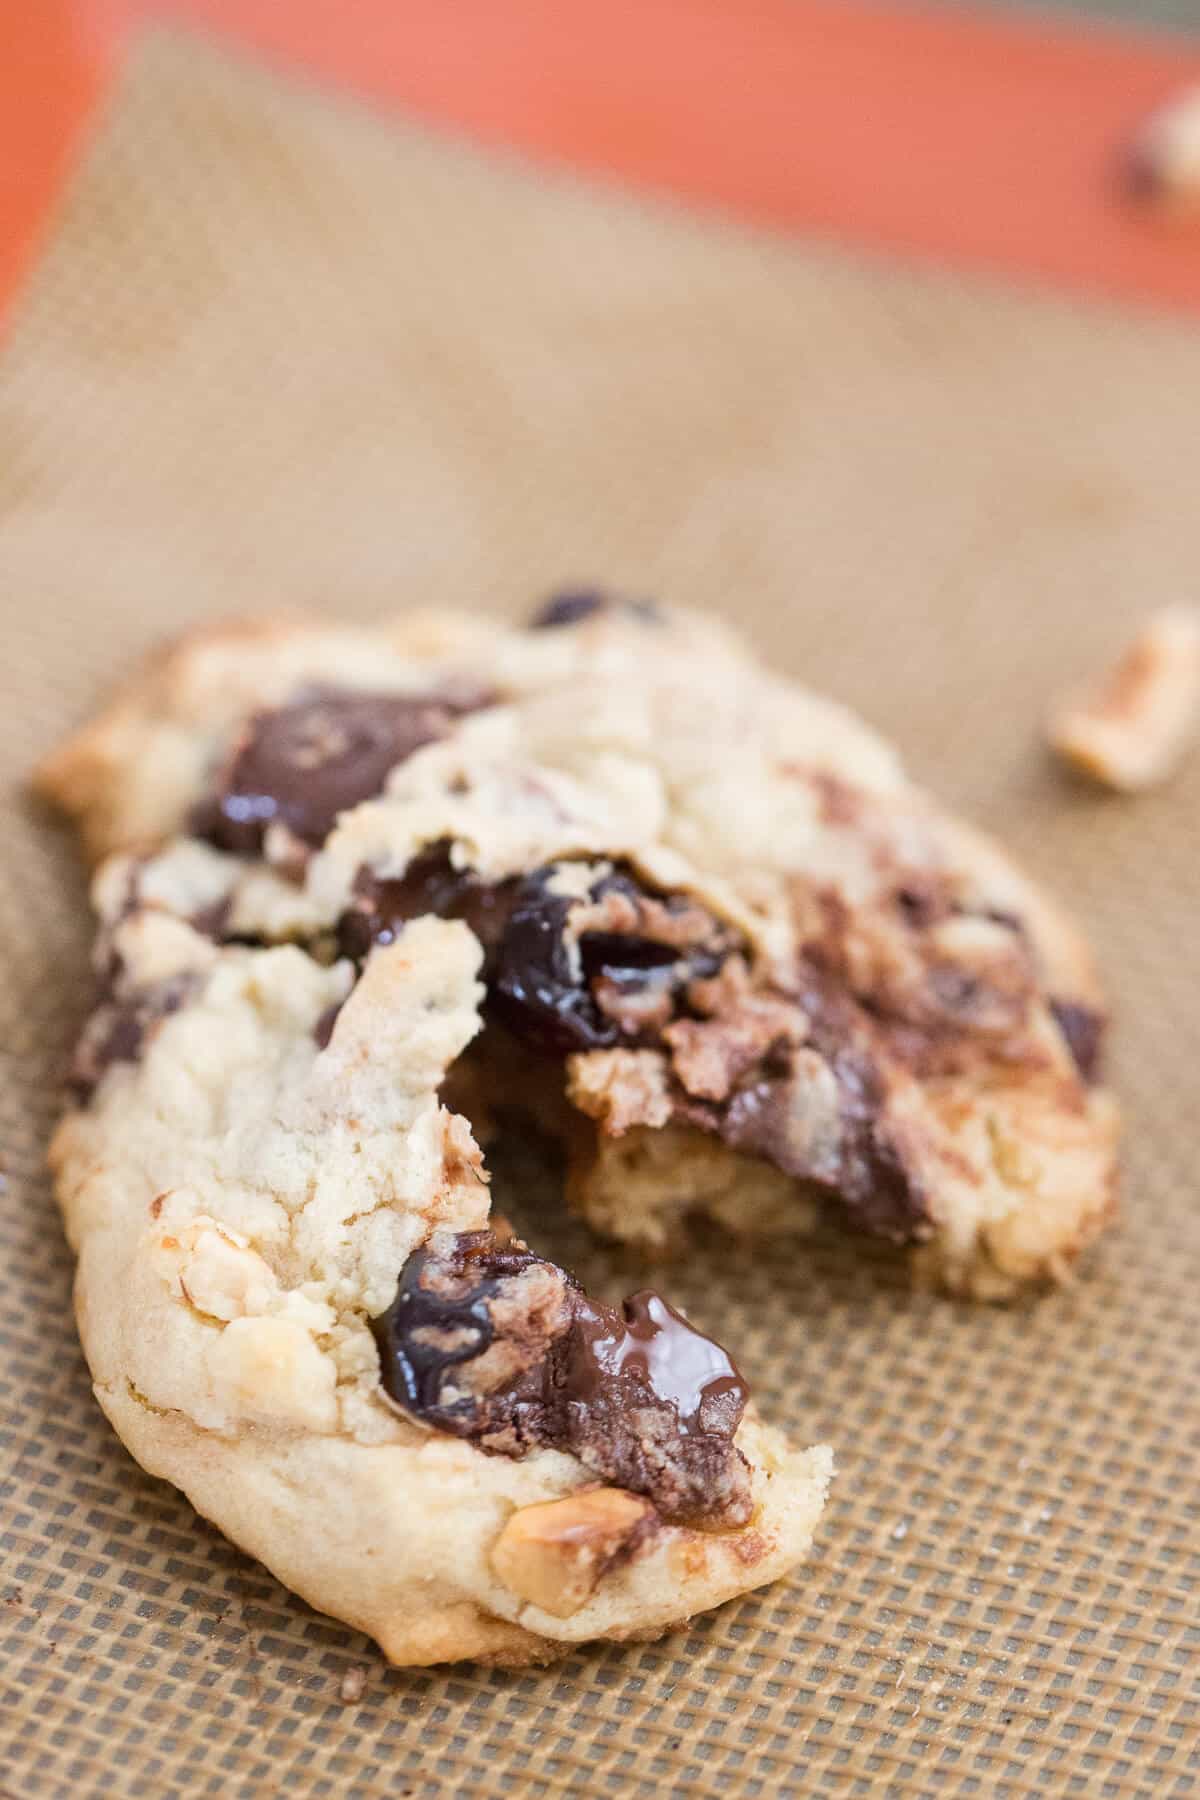 These cherry chip cookies are loaded! Each bite reveals chocolate chunks, hazelnuts and booze-soaked cherries!